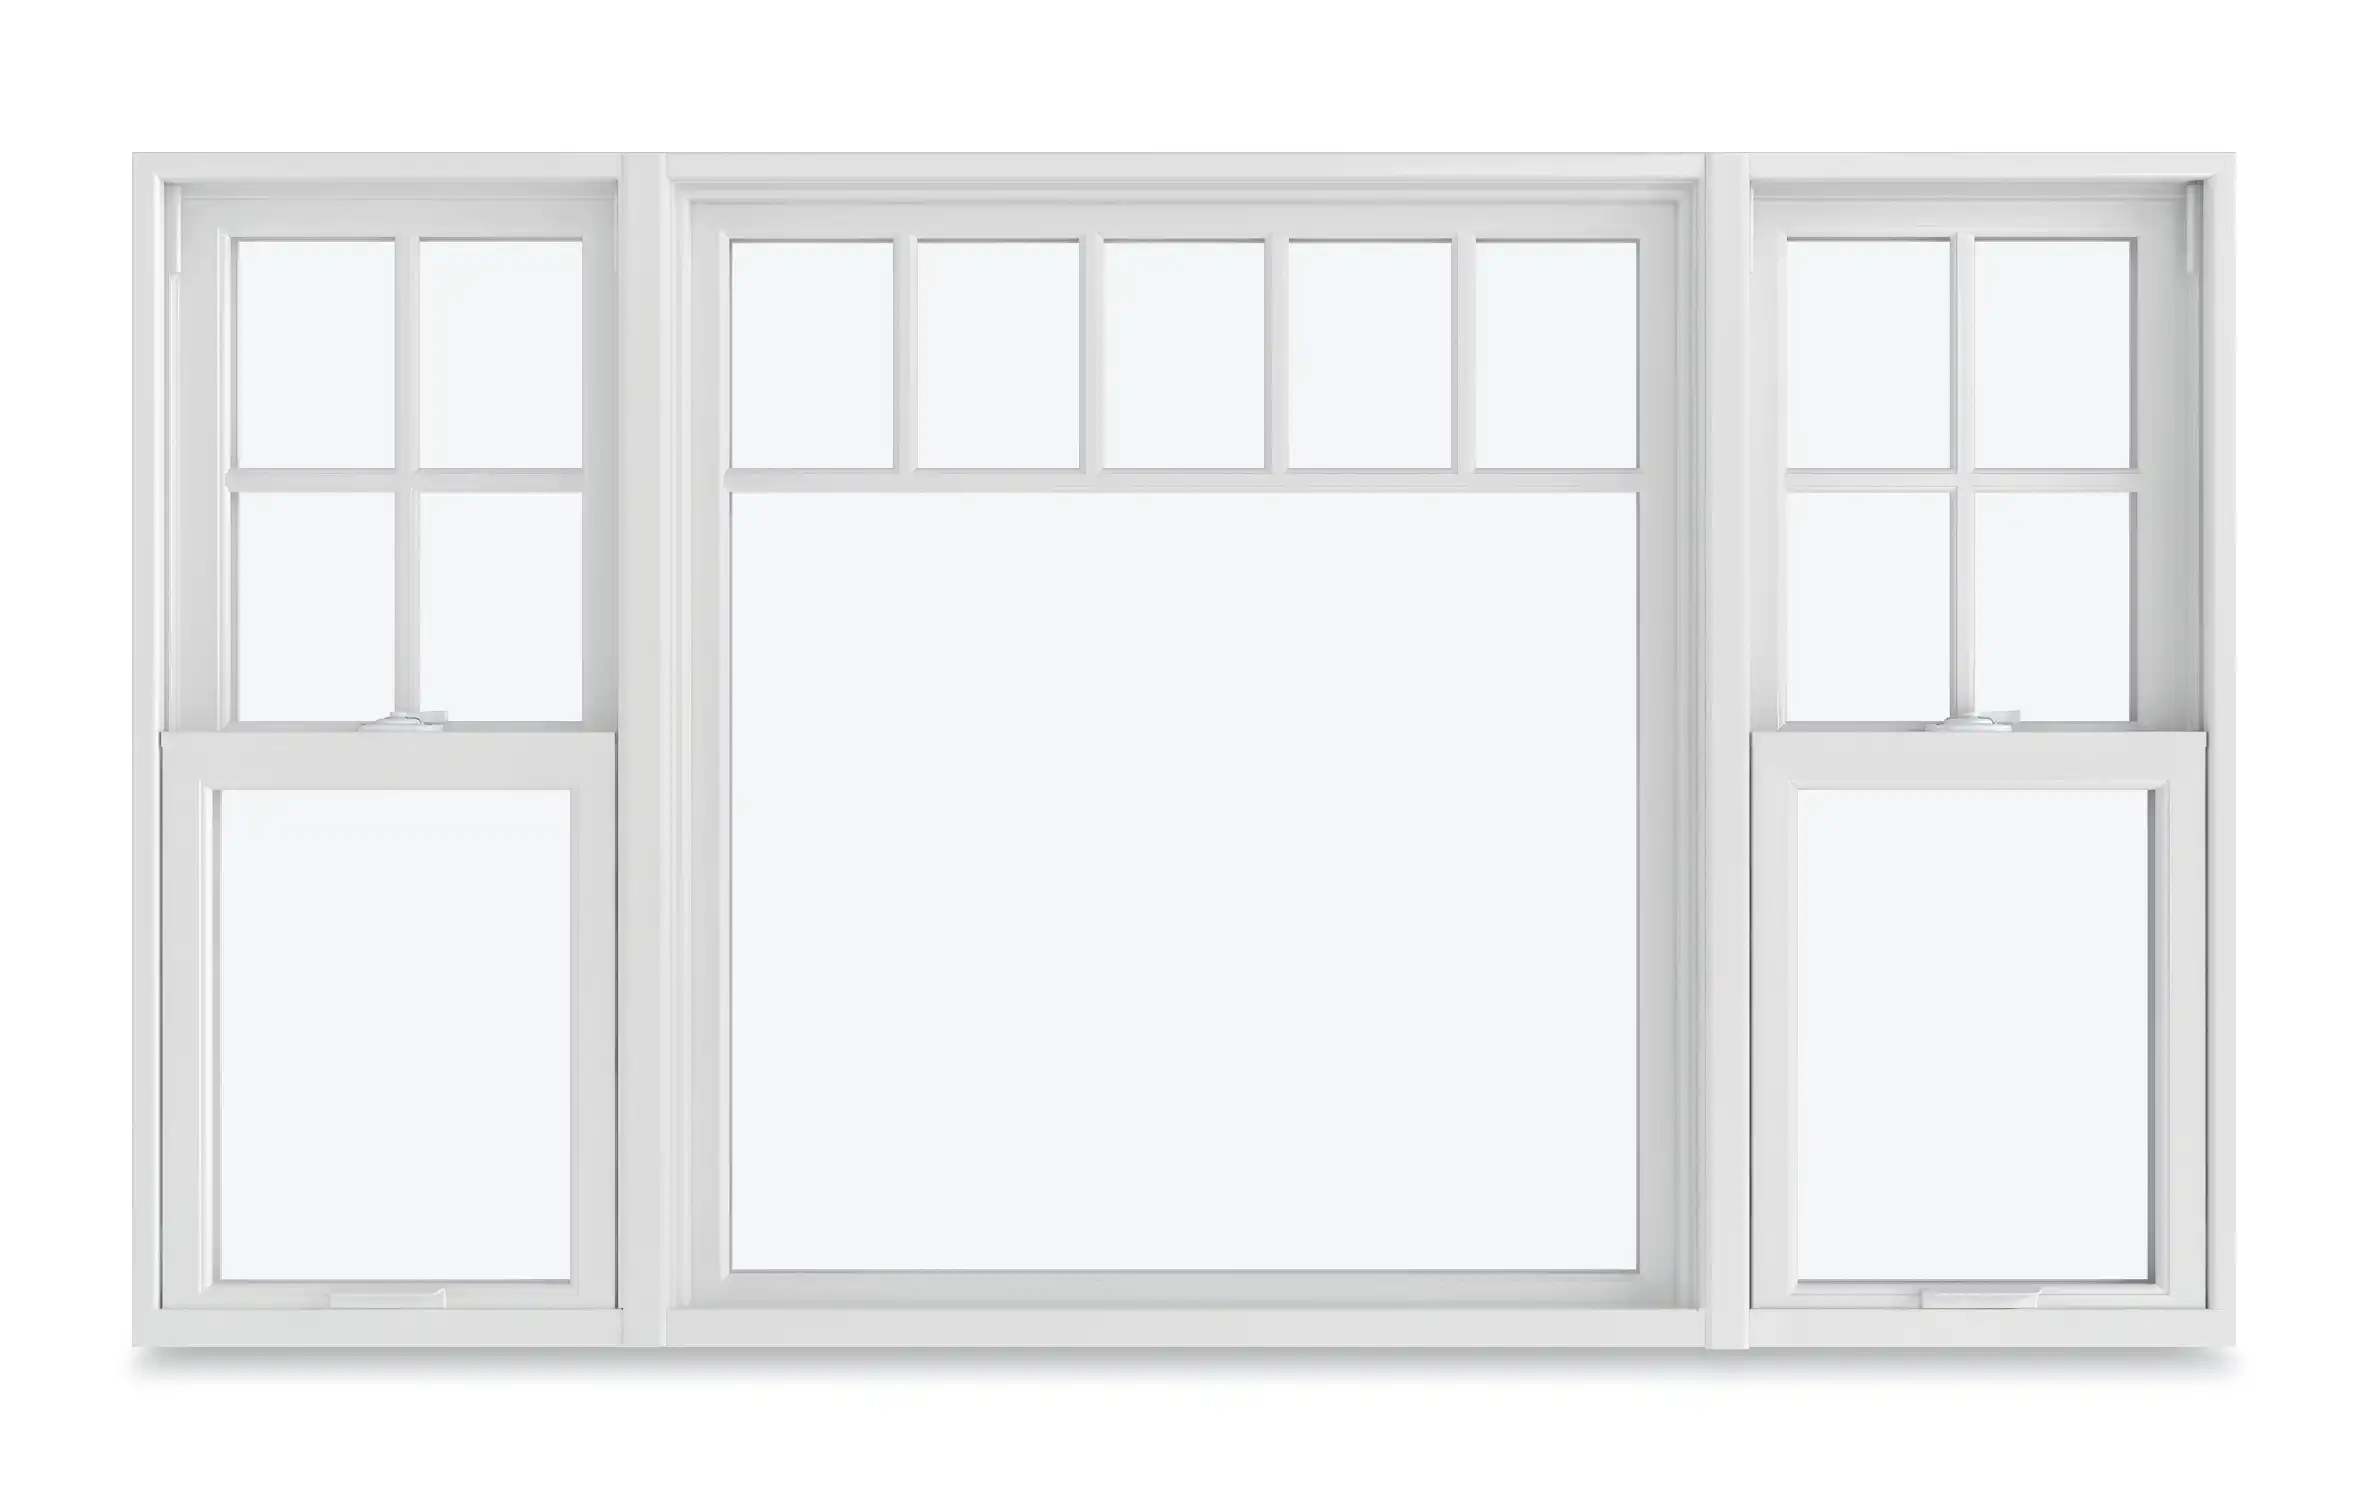 Image of a Marvin Replacement Double Hung with Picture window assembly featuring cottage style divided lites.